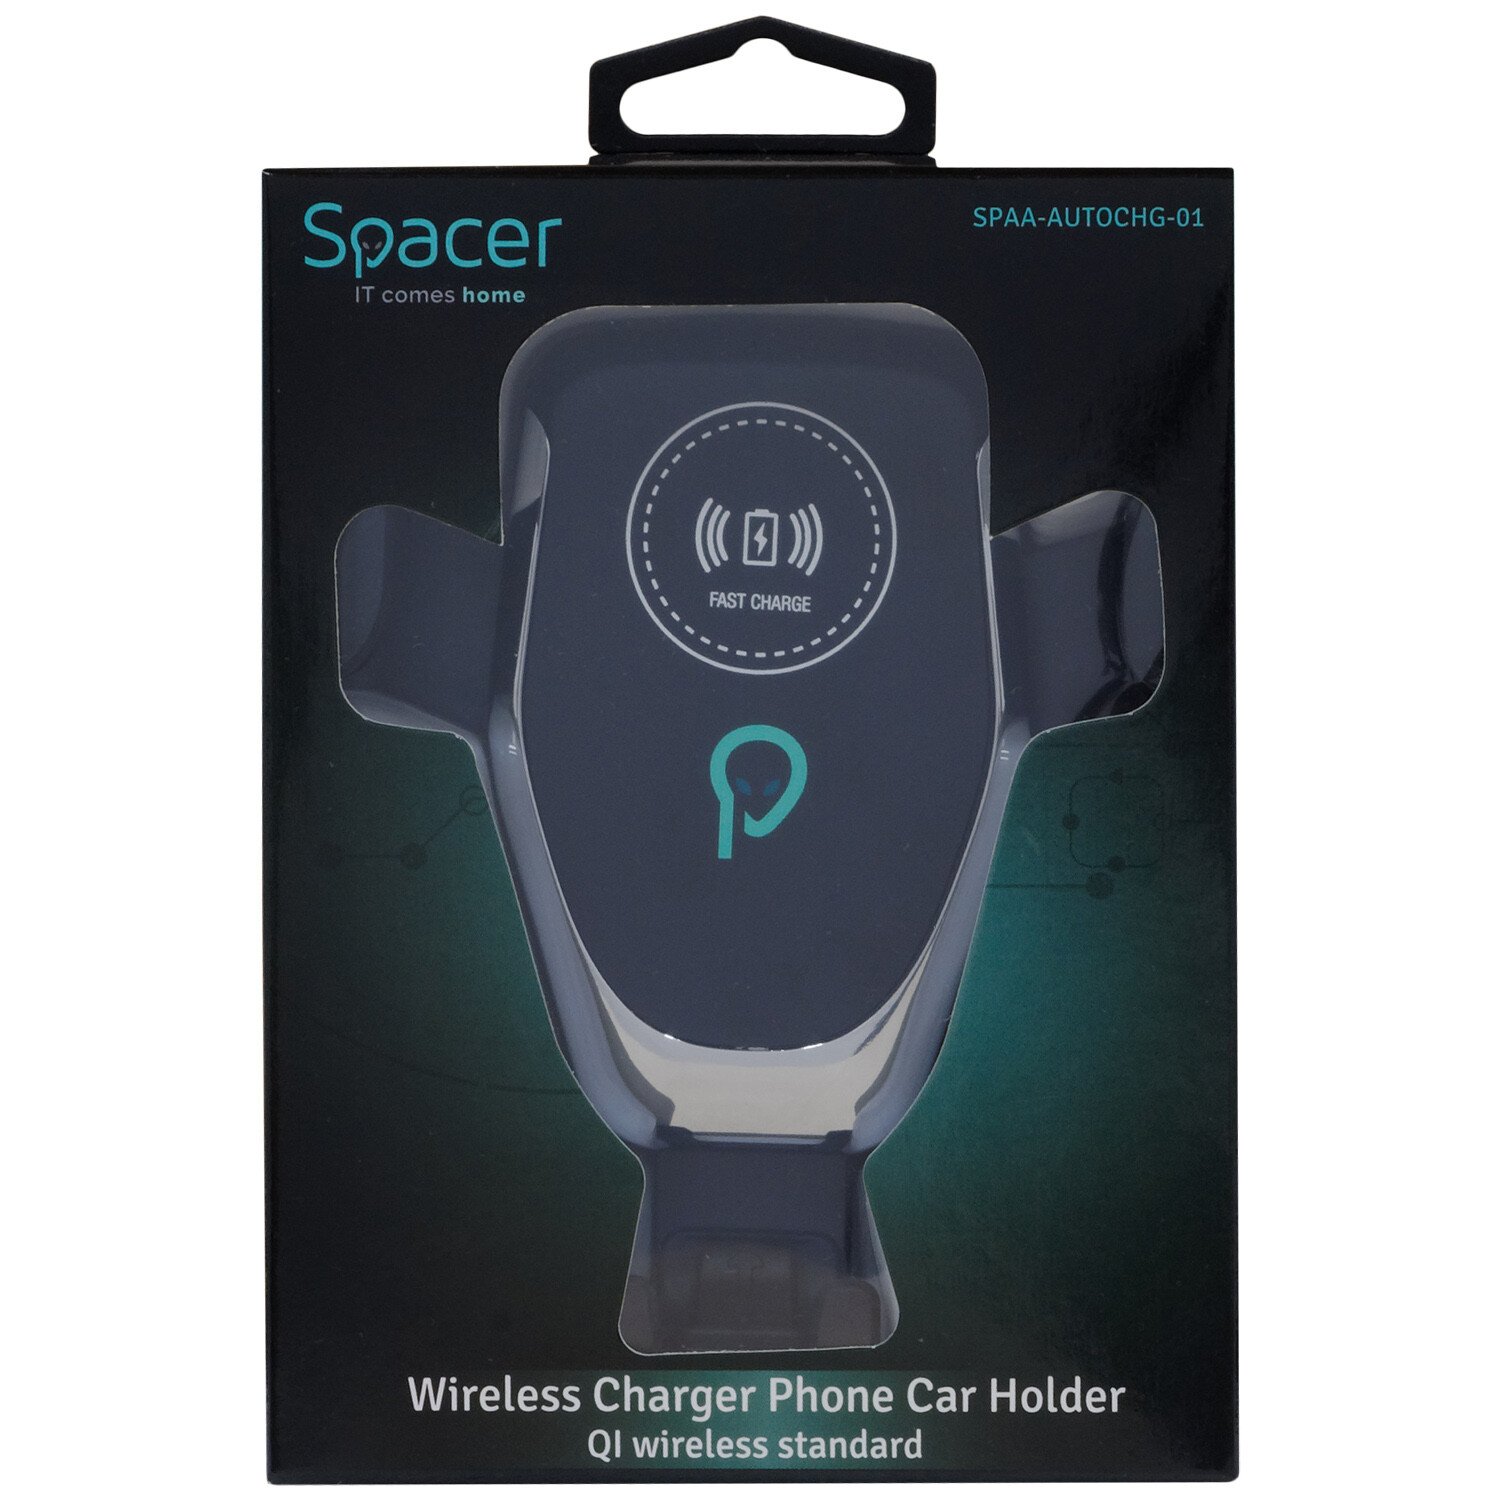 SUPORT auto si incarcator wireless SPACER pt. SmartPhone  2 in 1, fixare in grilaj, incarcare wireless Qi 10W "SPAA-AUTOCHG-01" thumb